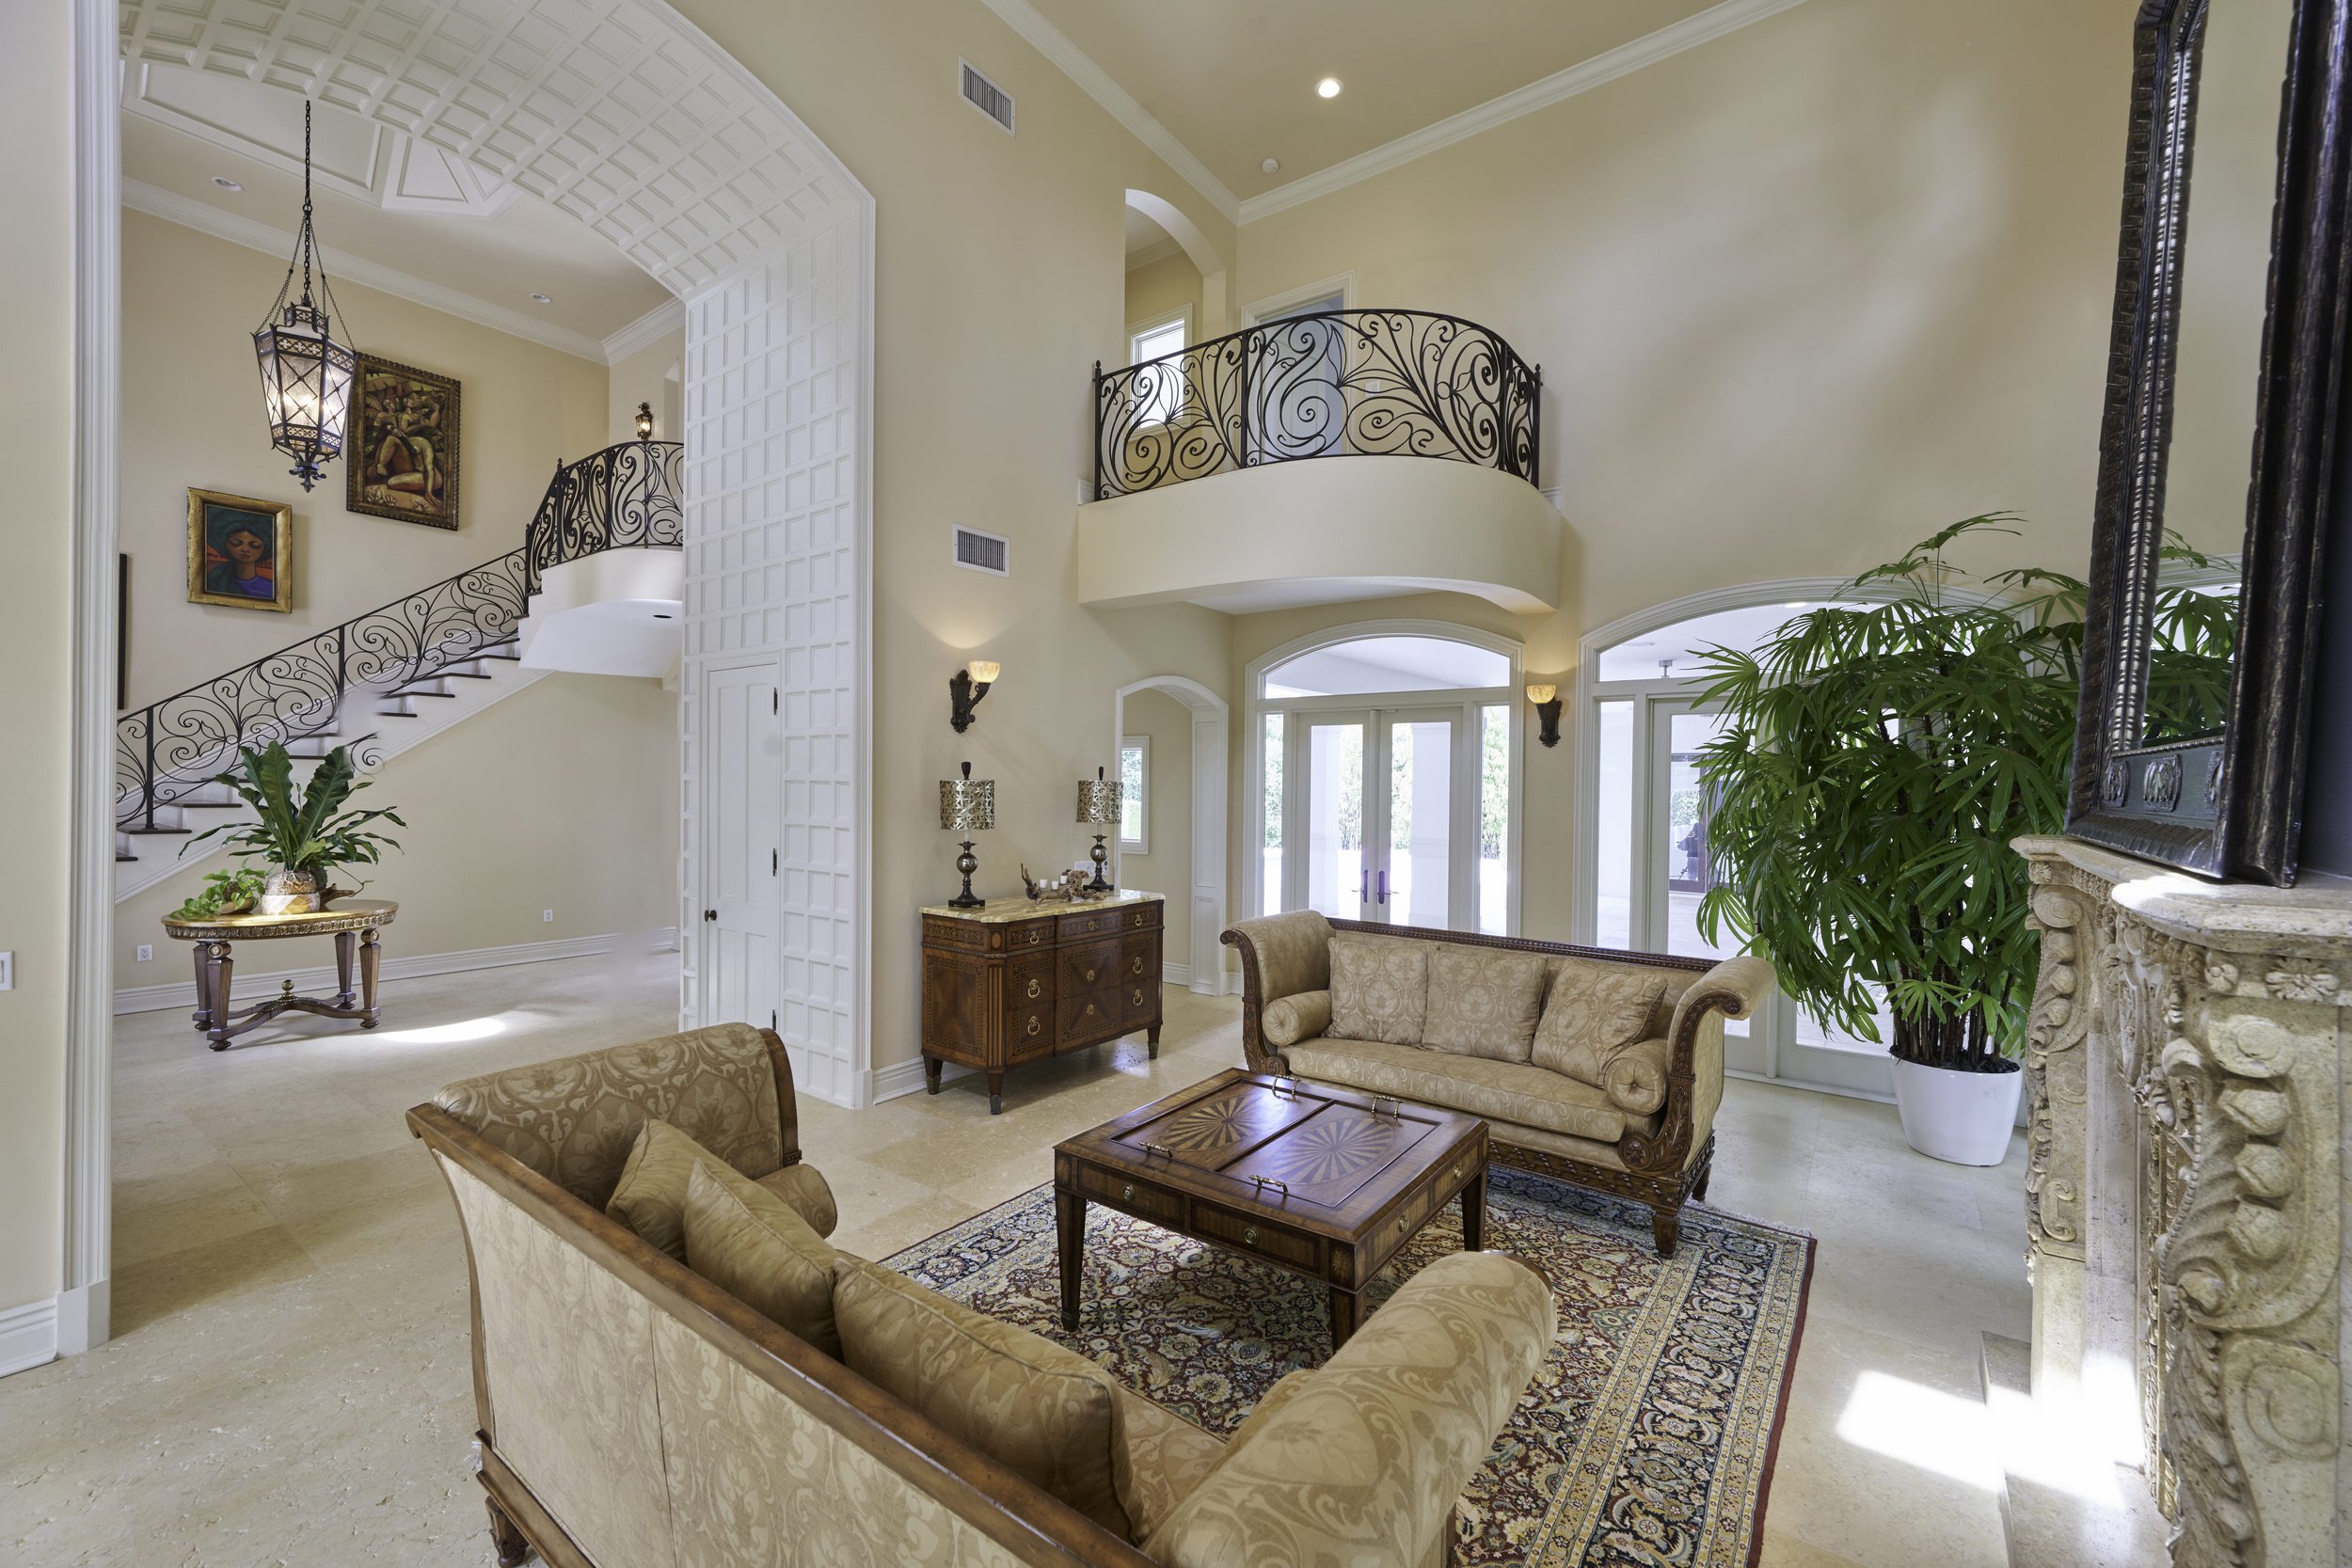 Step Inside This Coral Gables Mansion In The Exclusive Tahiti Beach Asking $12.9 Million 16.jpg